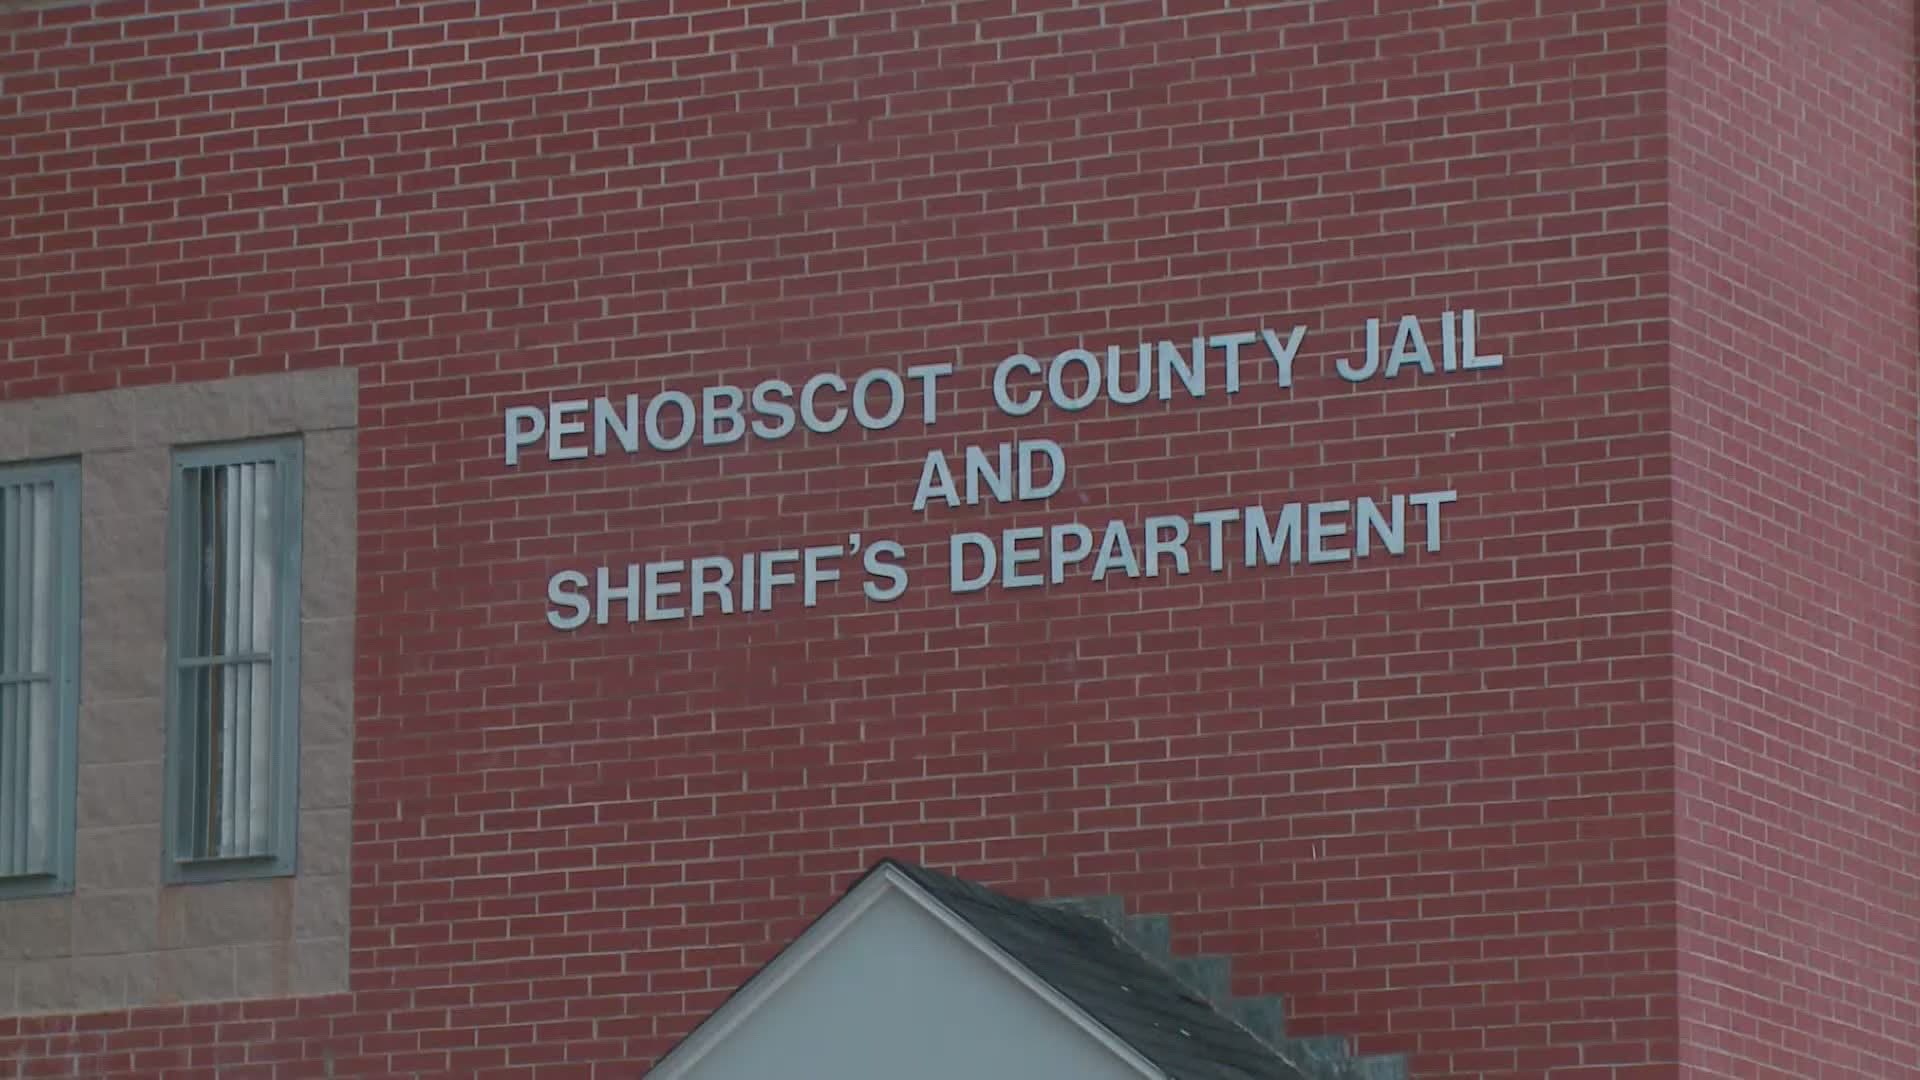 The Penobscot County Sheriff Troy Morton will not identify the inmate nor the officer involved in the assault and says he's been seeing attacks more often lately.